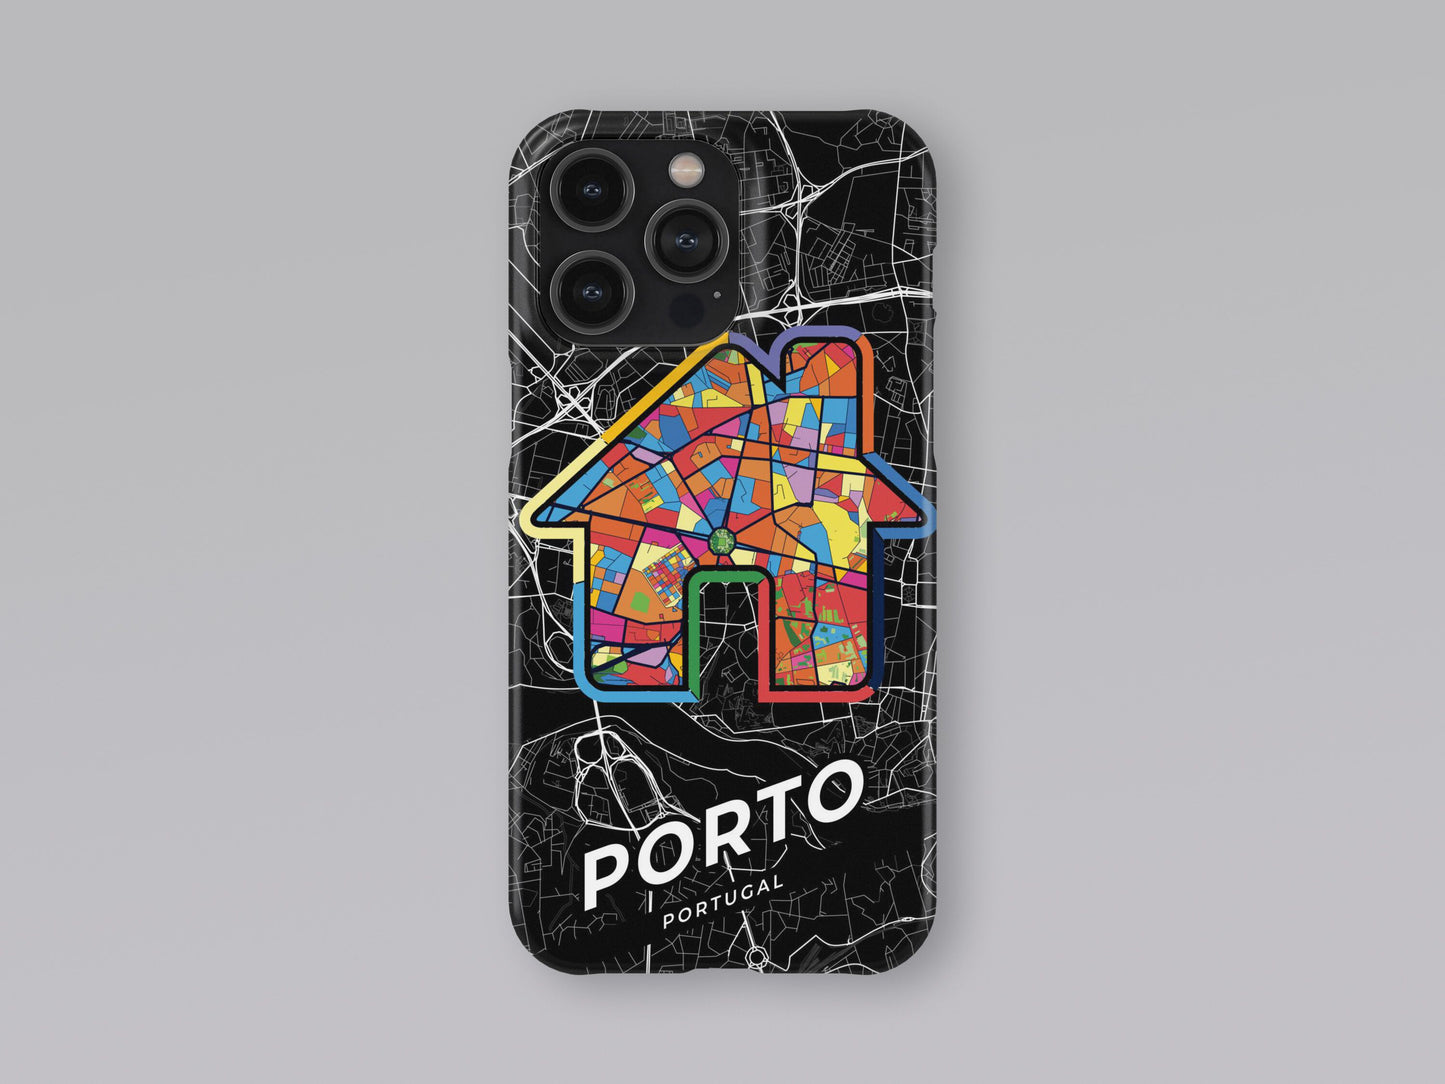 Porto Portugal slim phone case with colorful icon. Birthday, wedding or housewarming gift. Couple match cases. 3